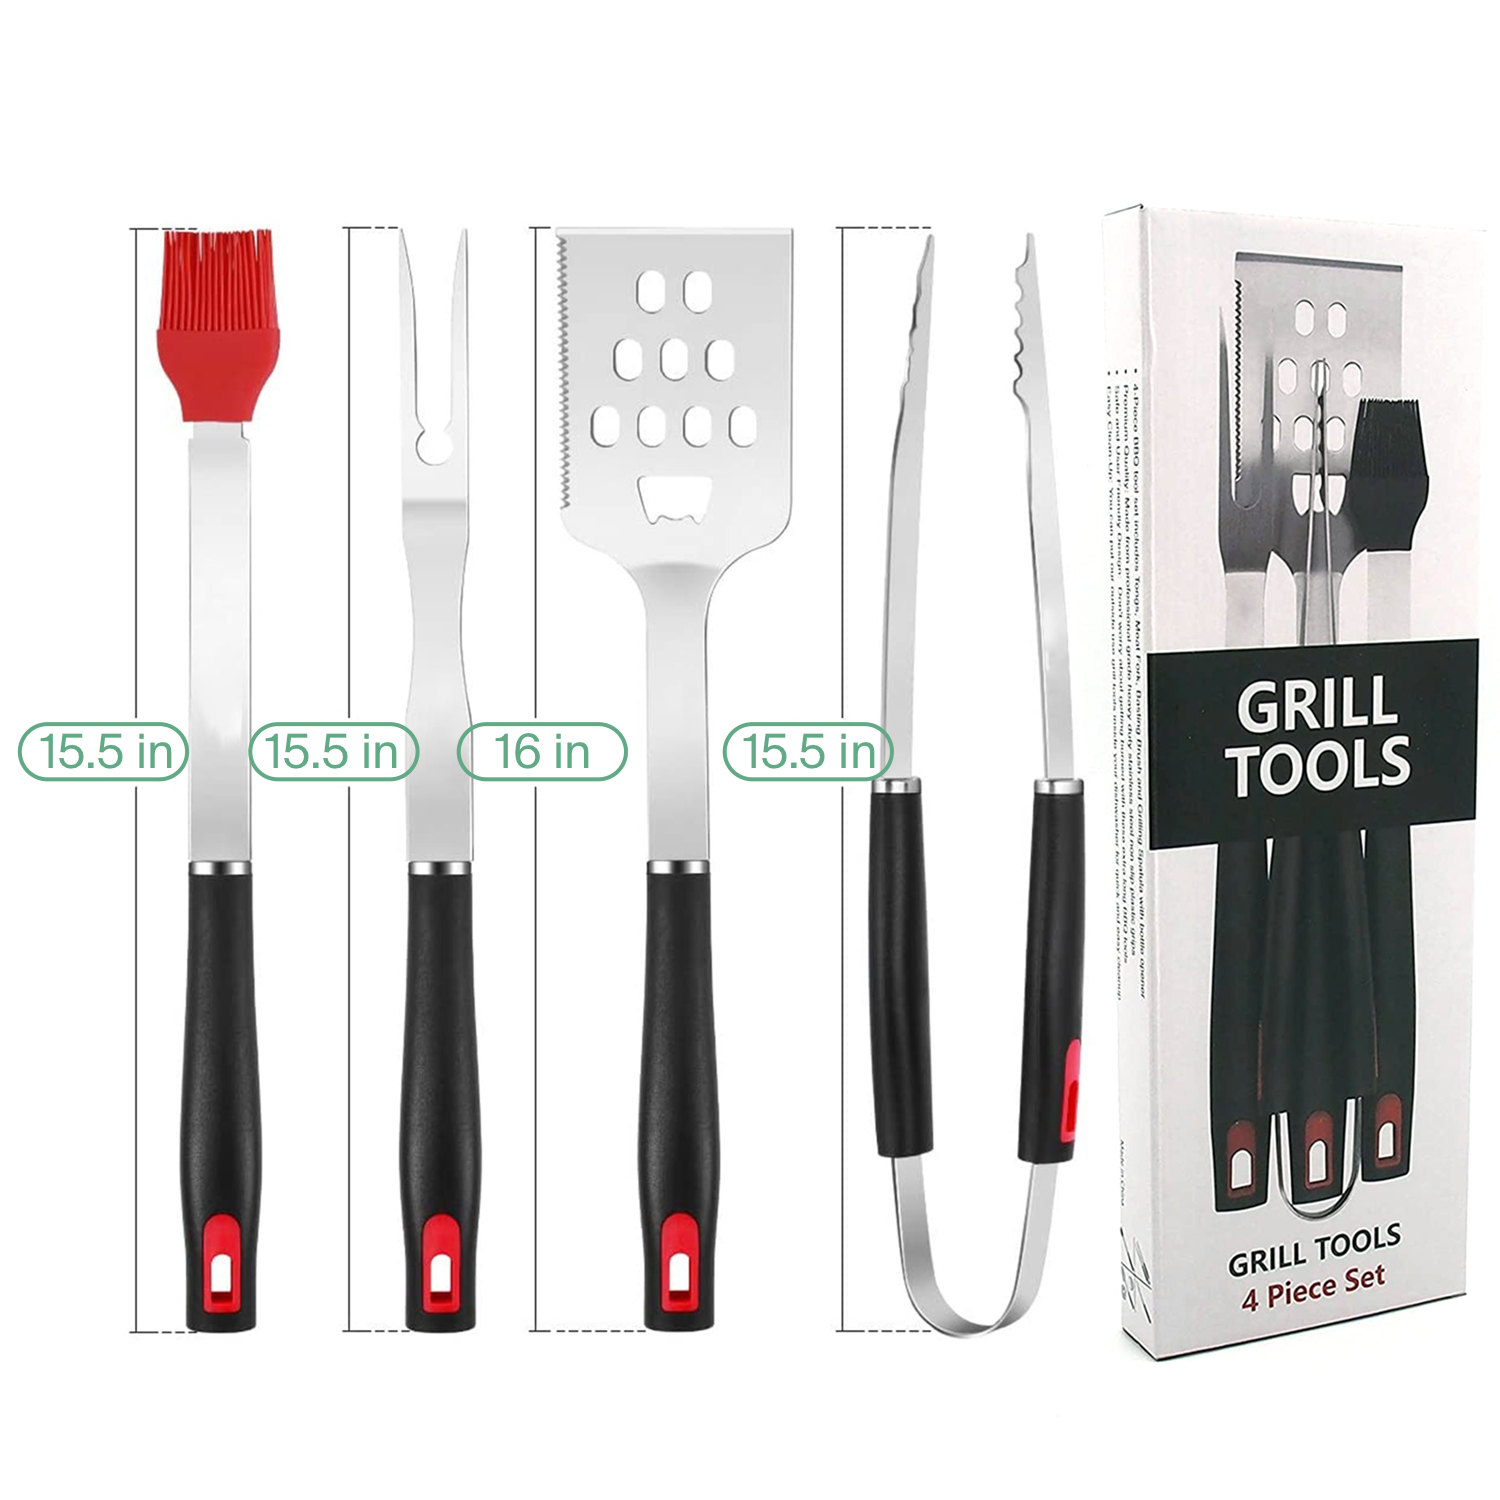 5 Piece BBQ Tool Set for Outdoor Barbecue Grilling (4 Piece Set) - image 4 of 9